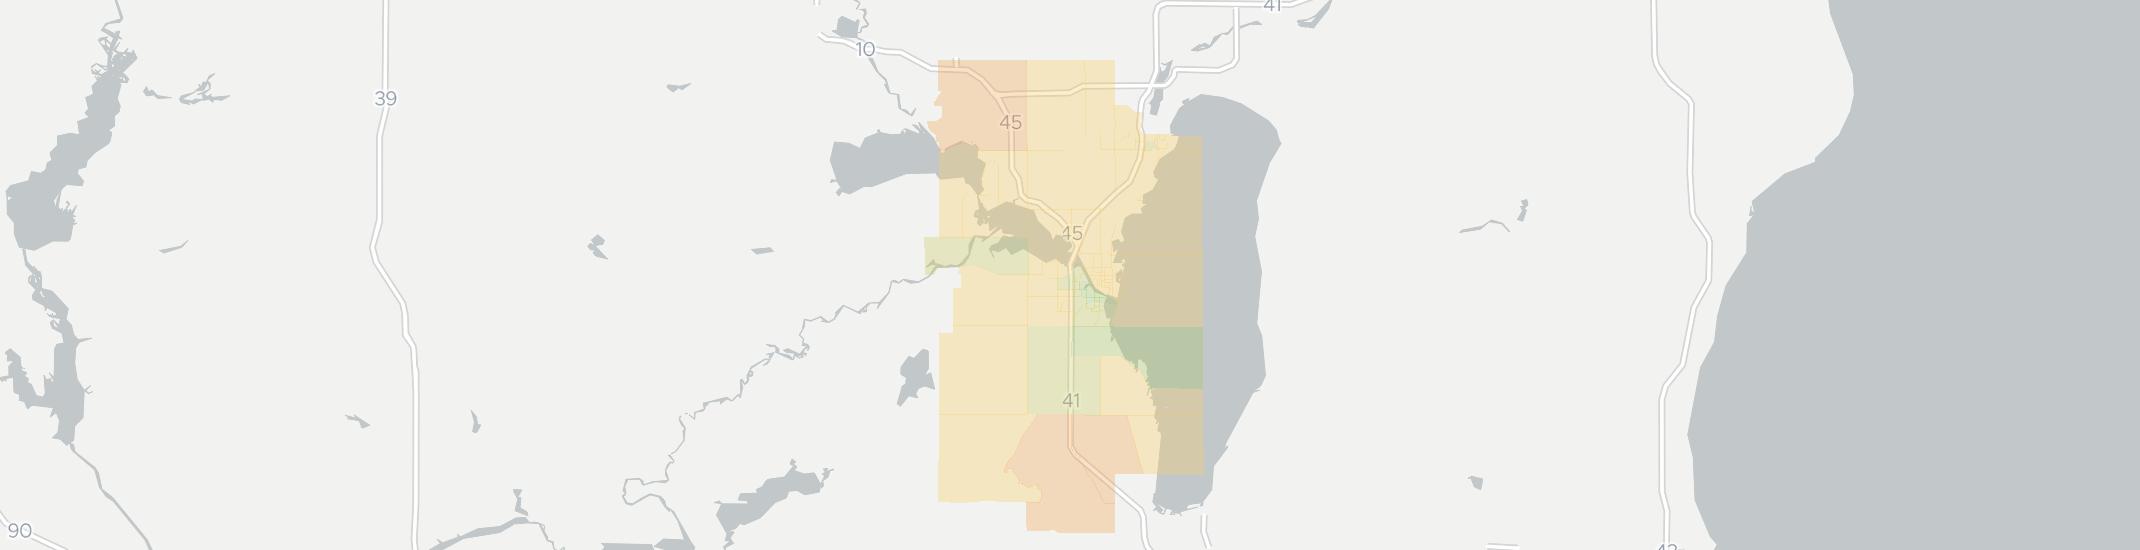 Oshkosh Internet Competition Map. Click for interactive map.